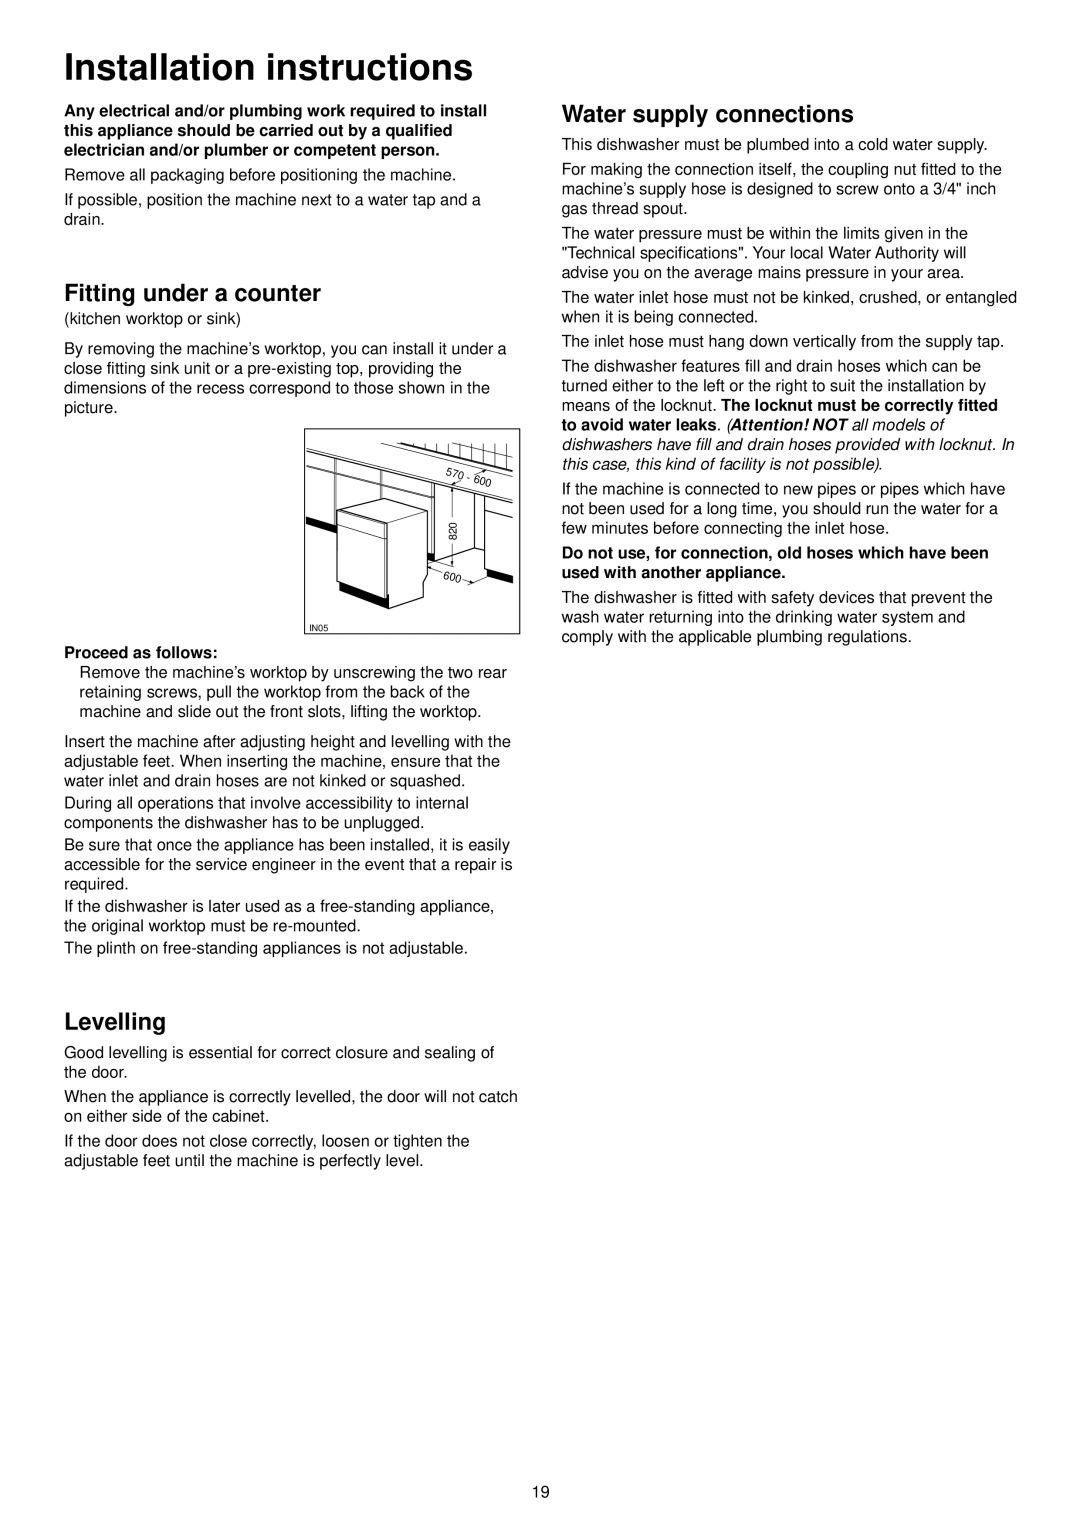 Zanussi ZSF 6161 S manual Installation instructions, Fitting under a counter, Levelling, Water supply connections 